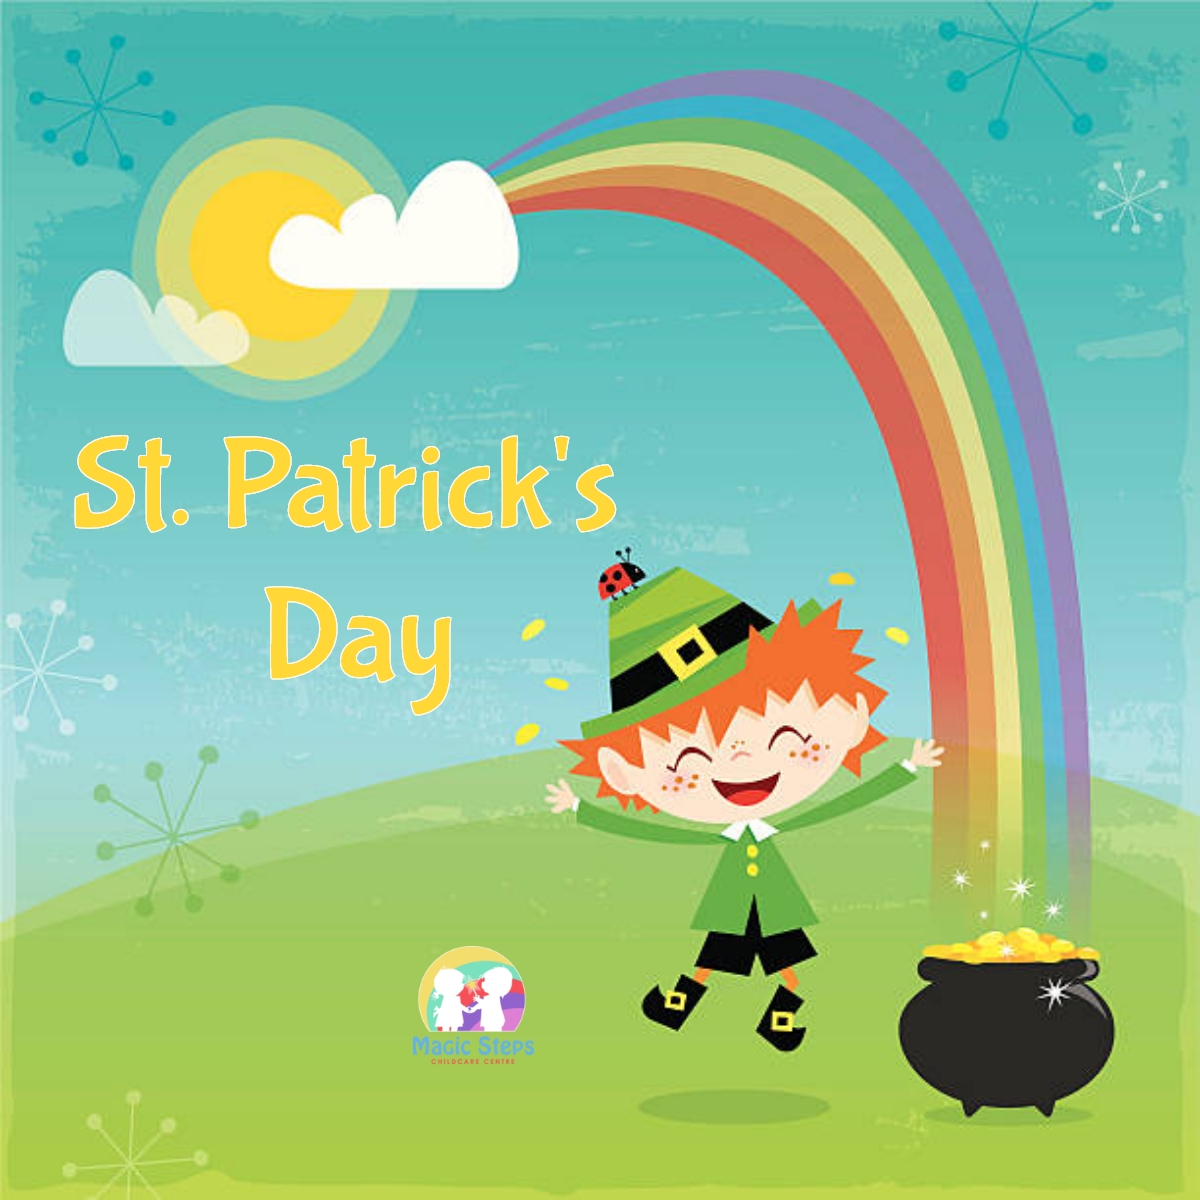 St. Patrick's Day-Friday 17th March